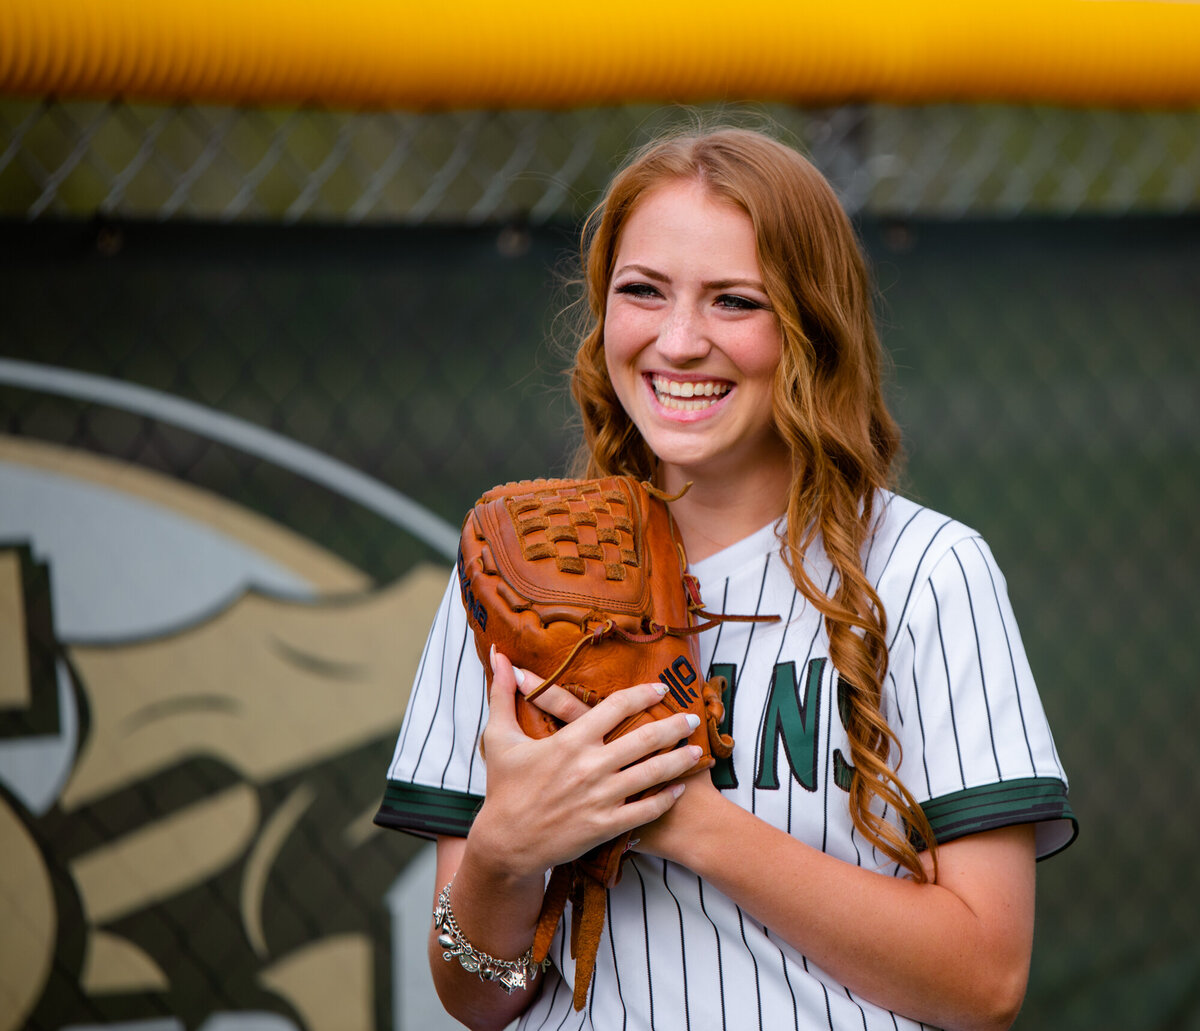 A high school softball player stands in front of the softball fence holding her glove.